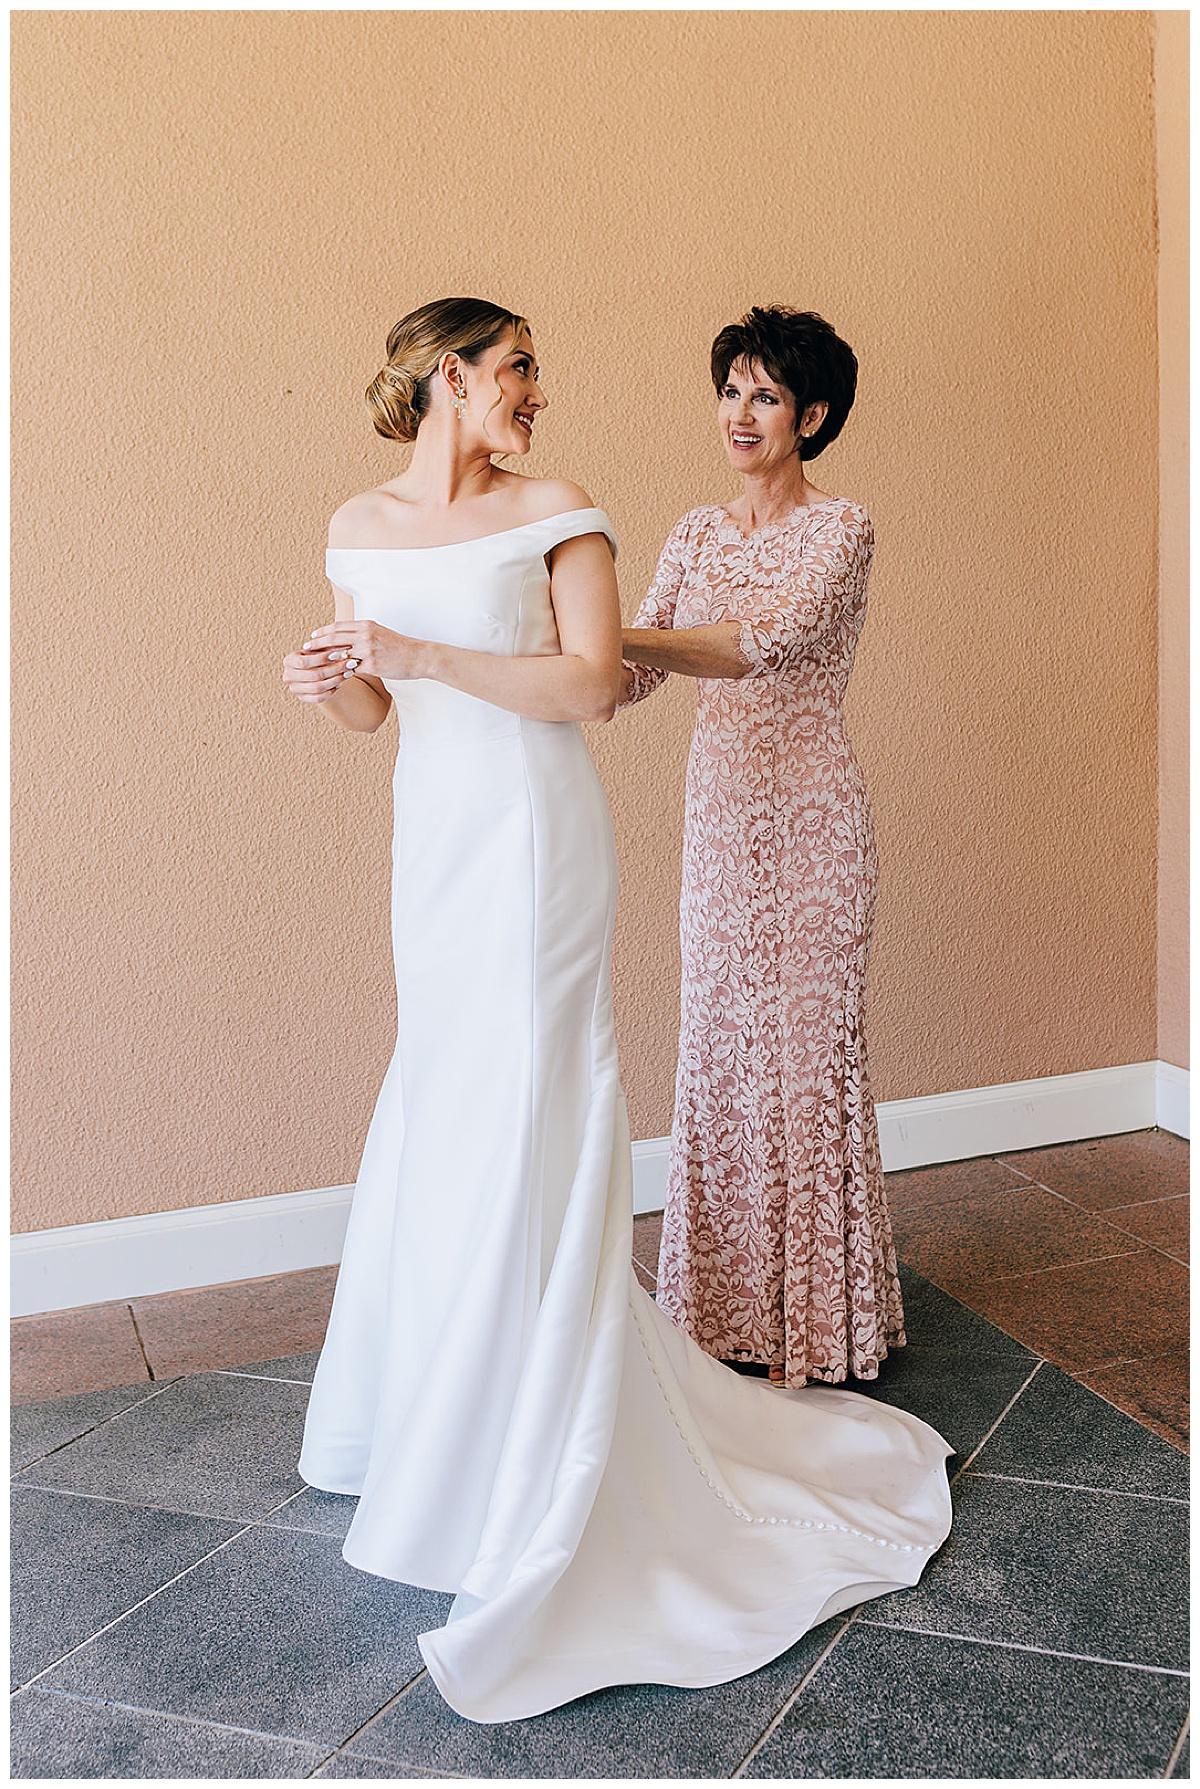 Mother helps bride with dress for Detroit Wedding Photographer